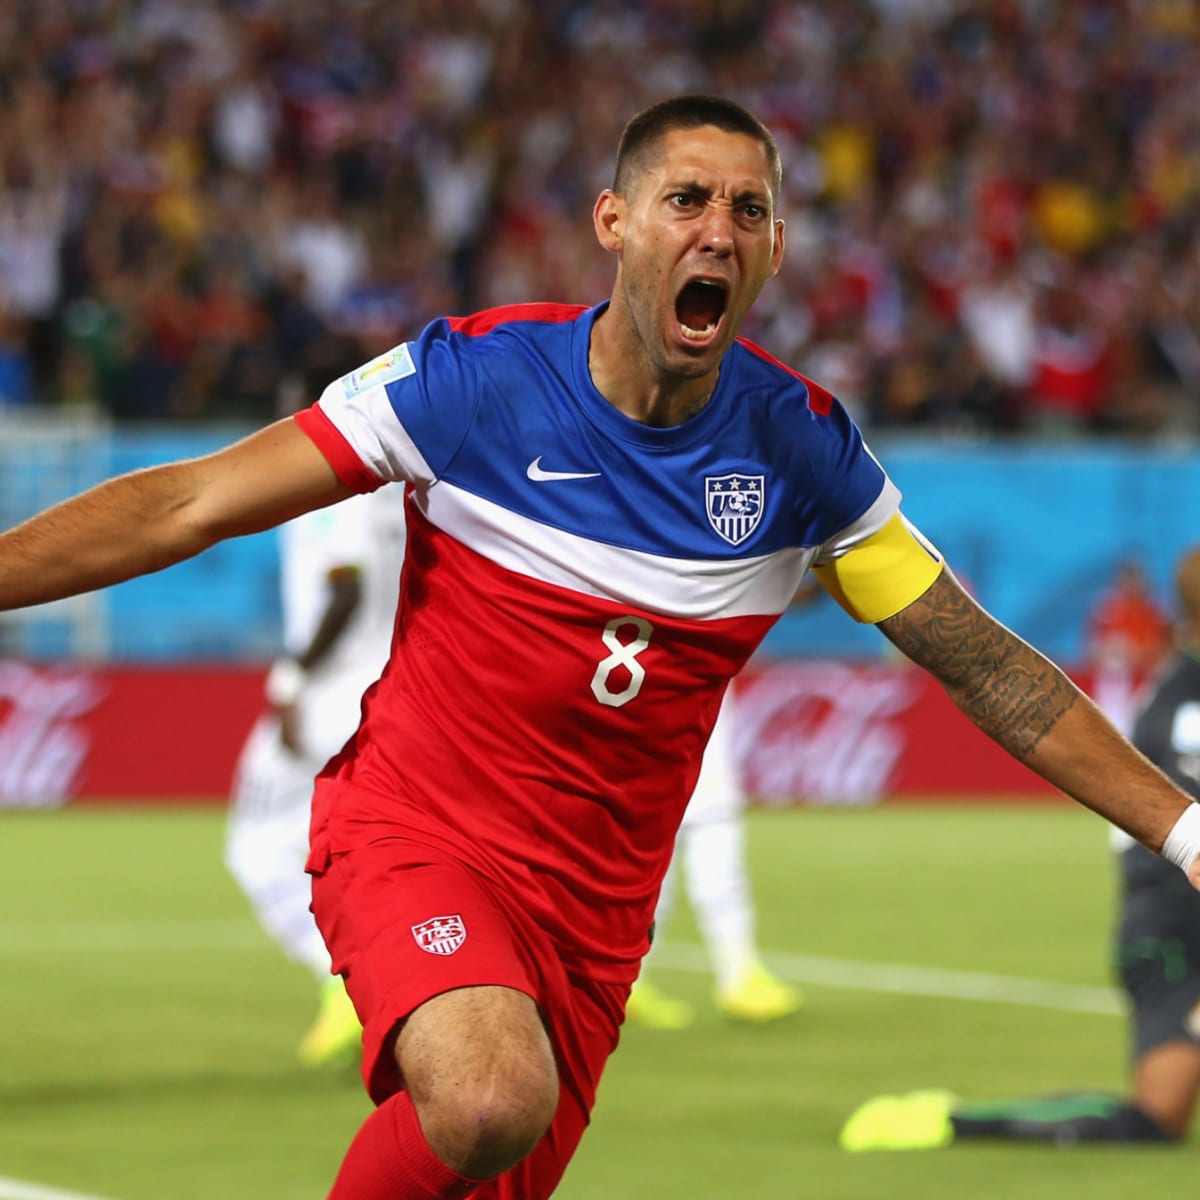 East Texans travel to see Clint Dempsey play on world stage